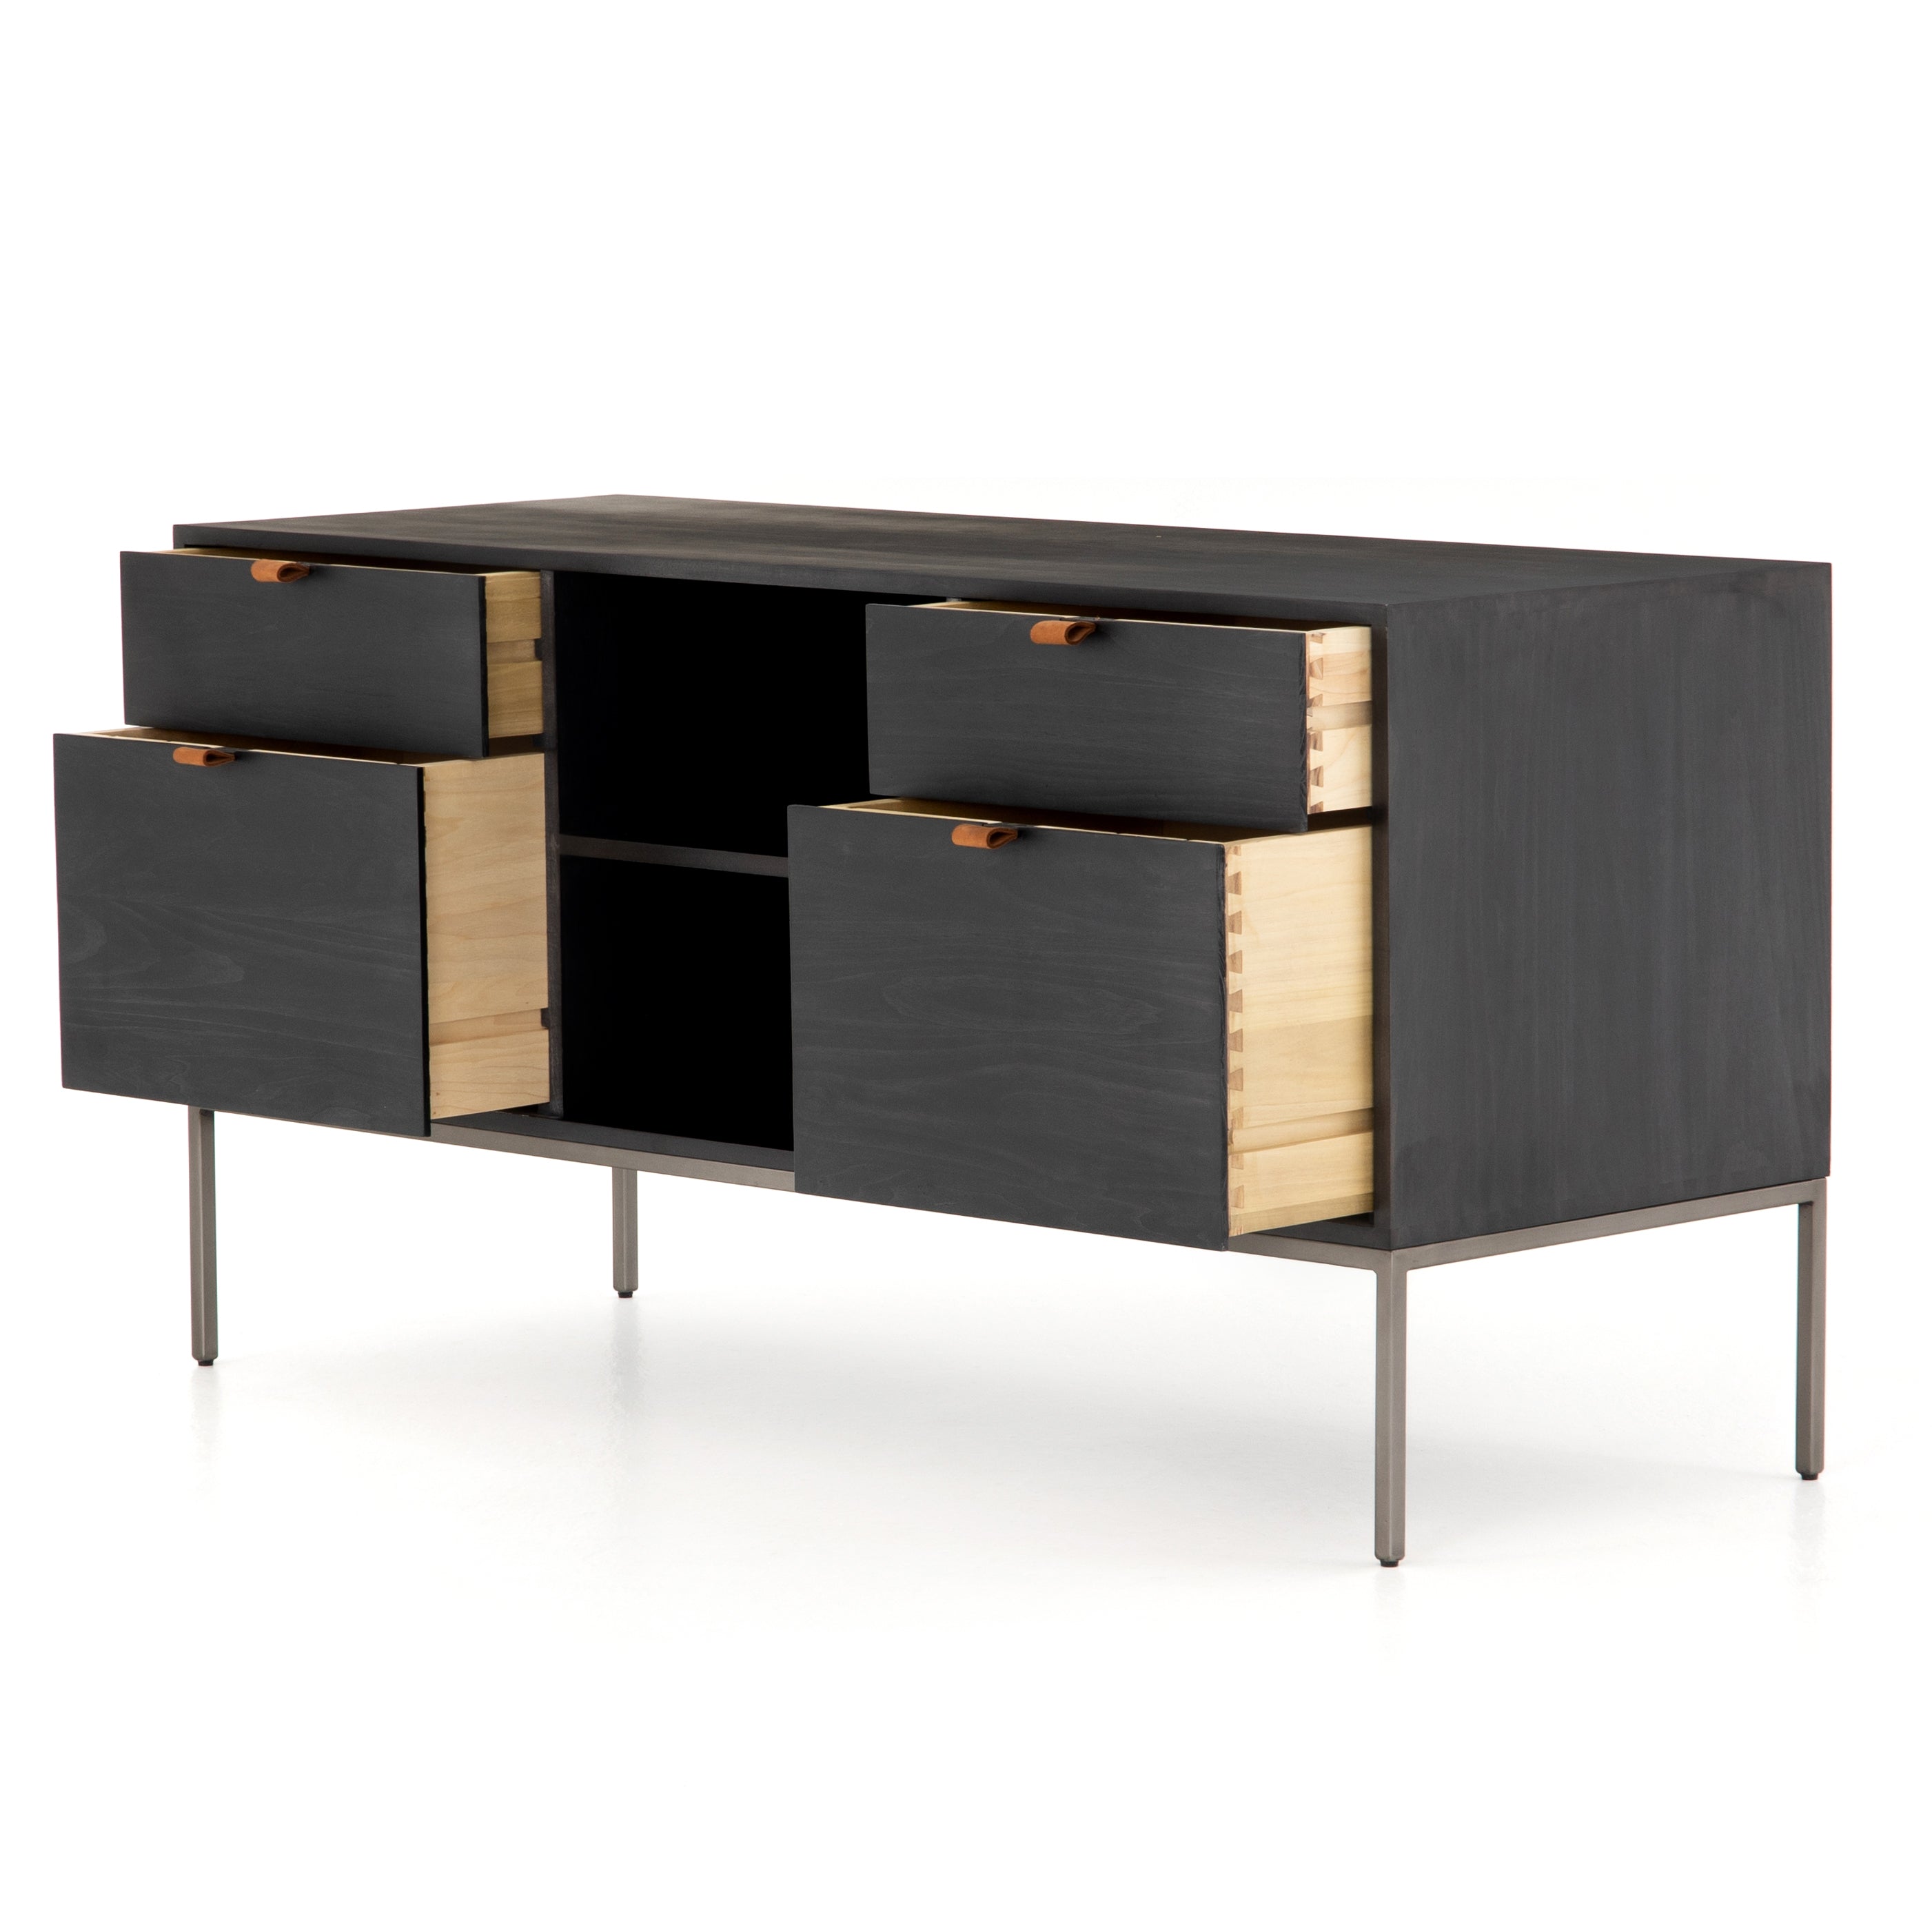 Inspired by clean mid-century design, this Trey Modular Filing Credenza - Black Poplar brings generous storage space to the modern office, with a fully finished back pus metal-secured leather pulls for an element of surprise. Great solo or paired with matching desk or filing cabinet.  Overall Dimensions: 59.75"w x 22.00"d x 31.25"h